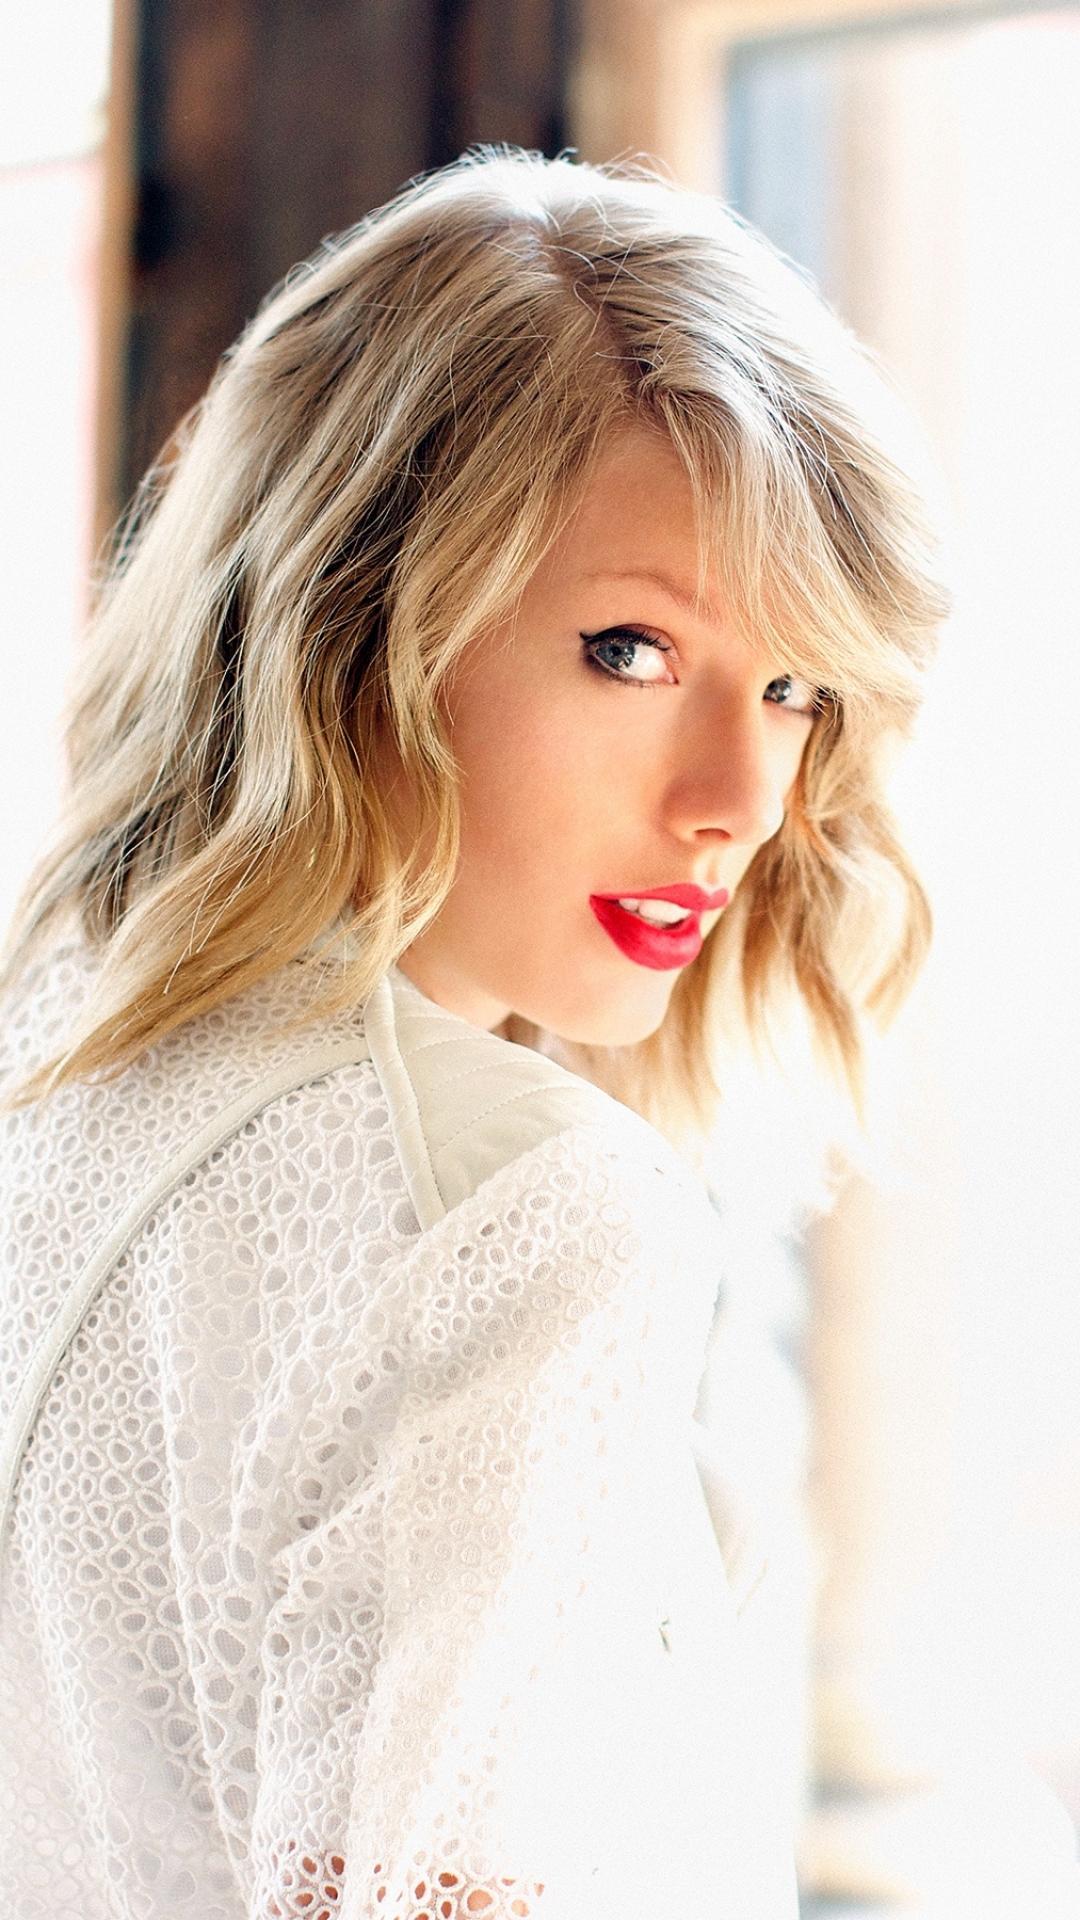 Taylor Swift Wallpapers Hd For Android Apk Download